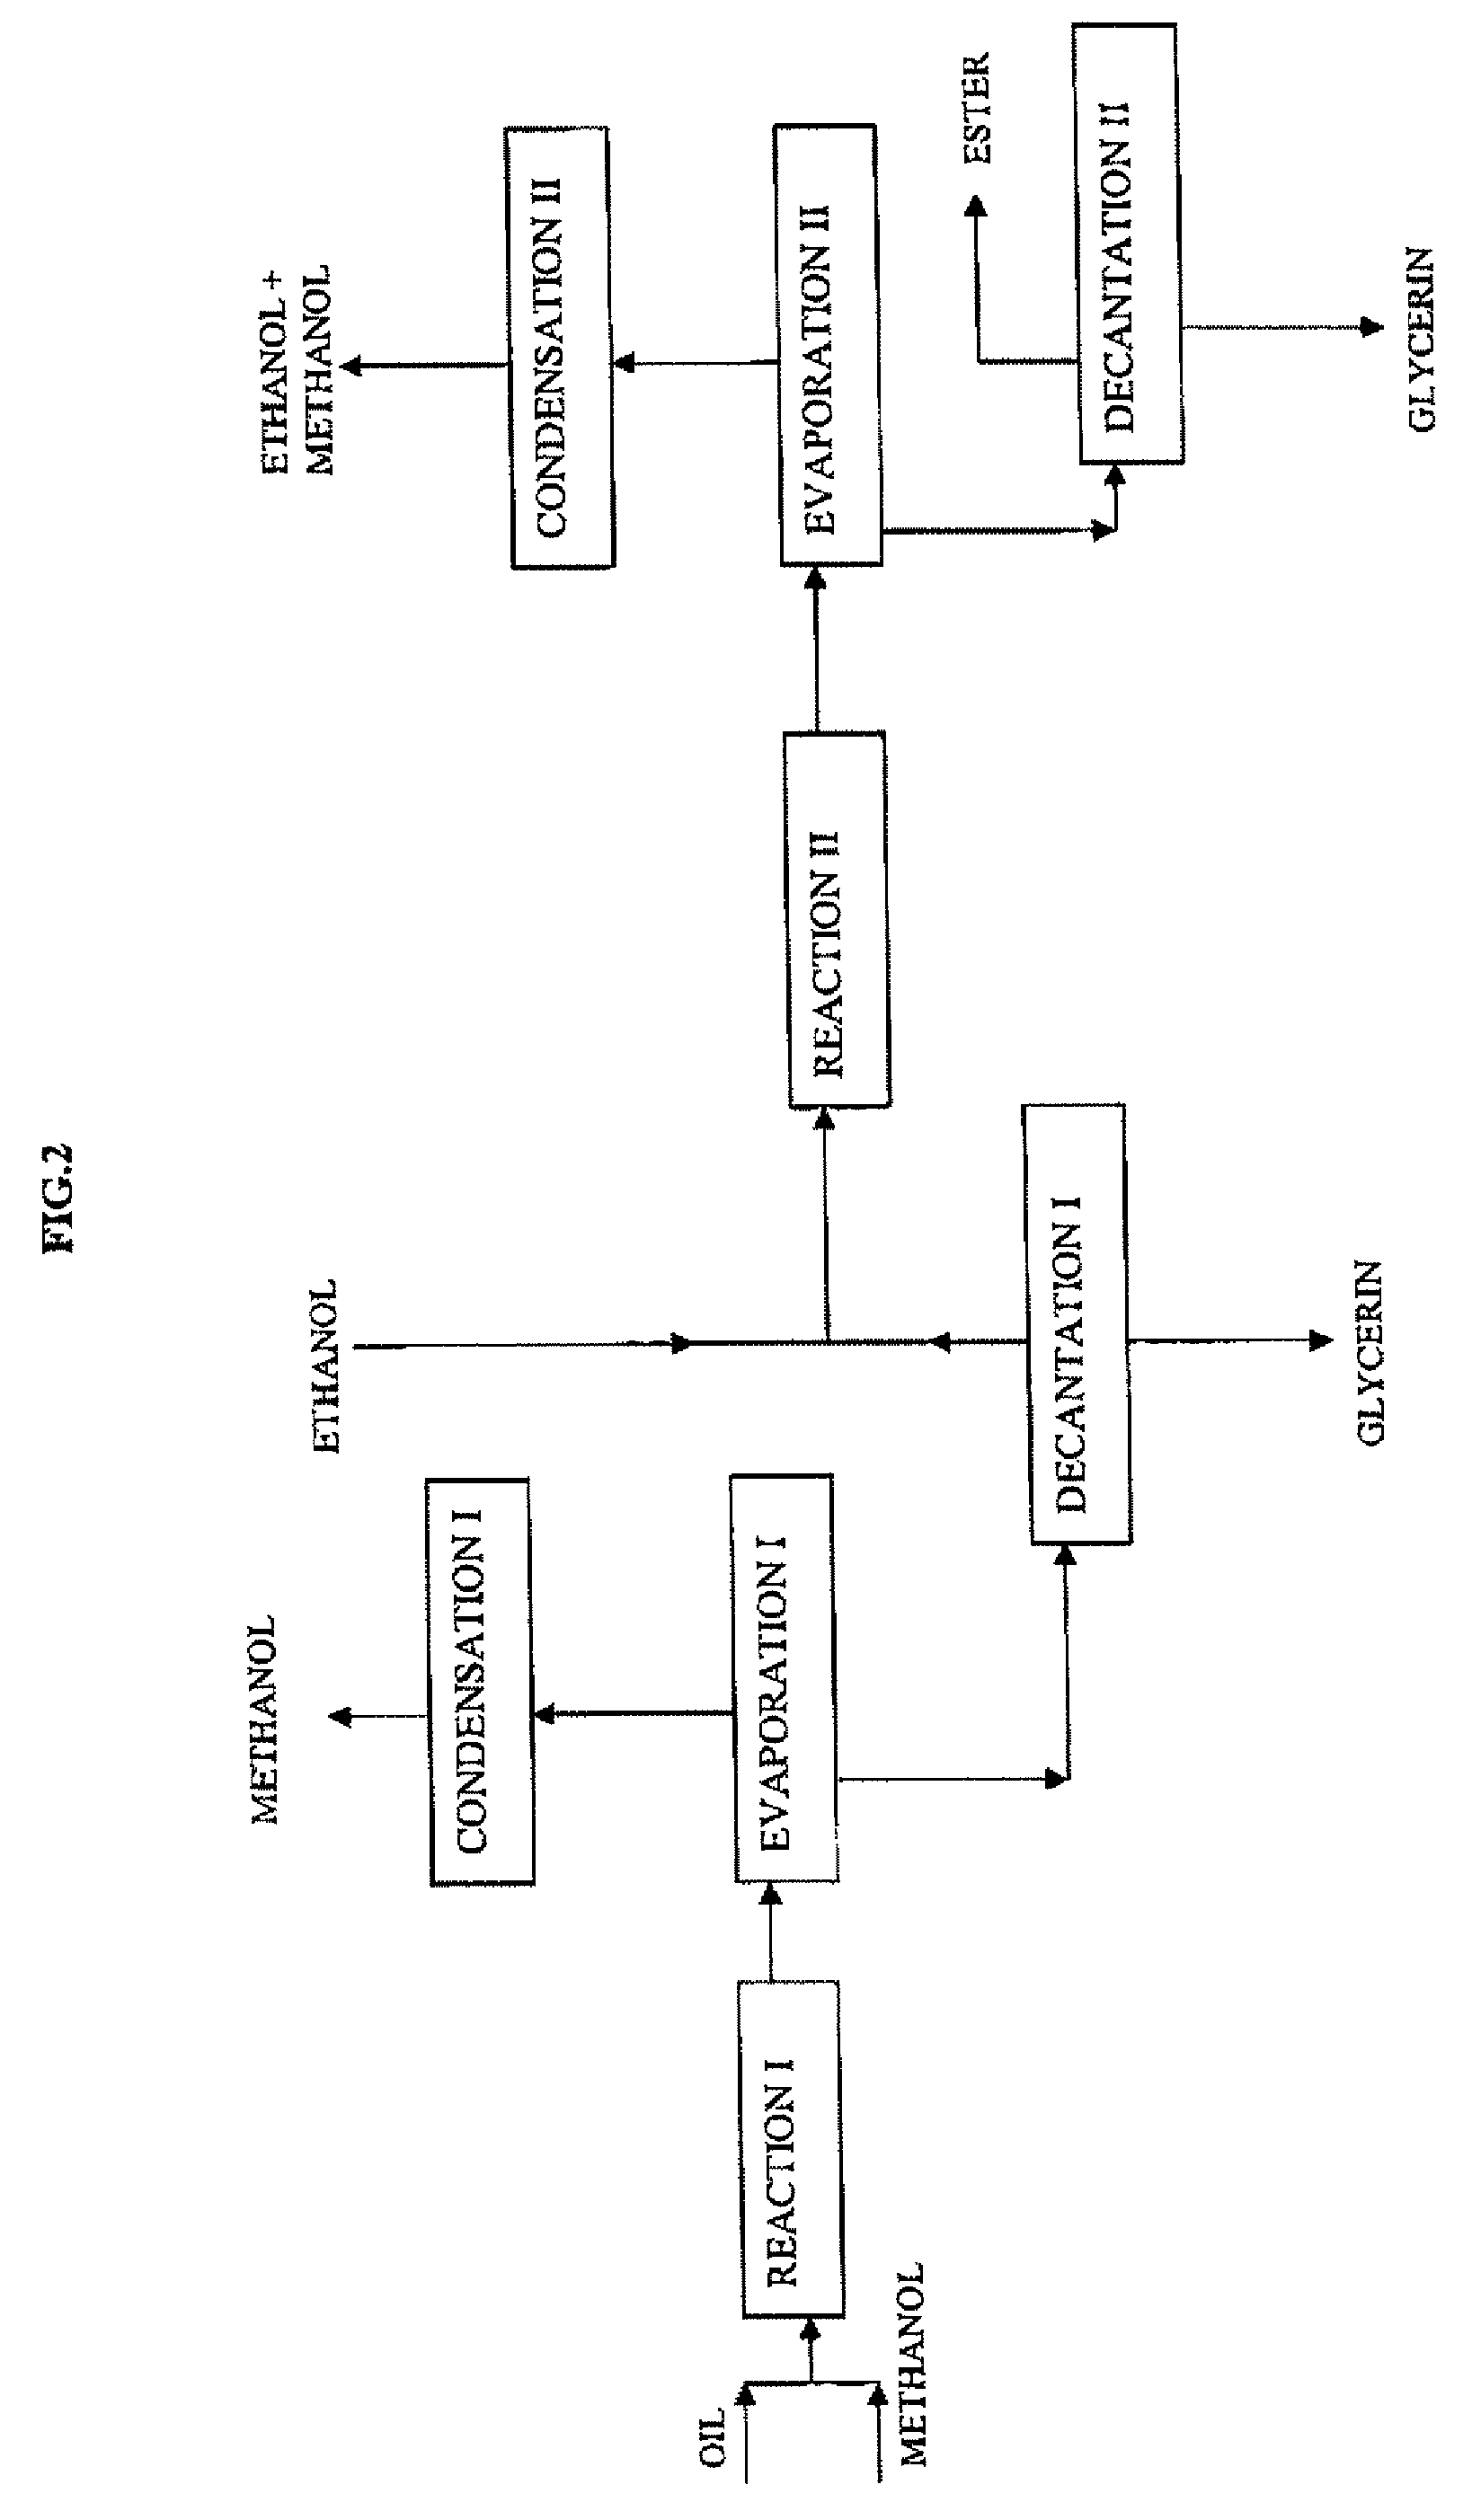 Method of manufacturing fatty acid ethyl esters from triglycerides and alcohols